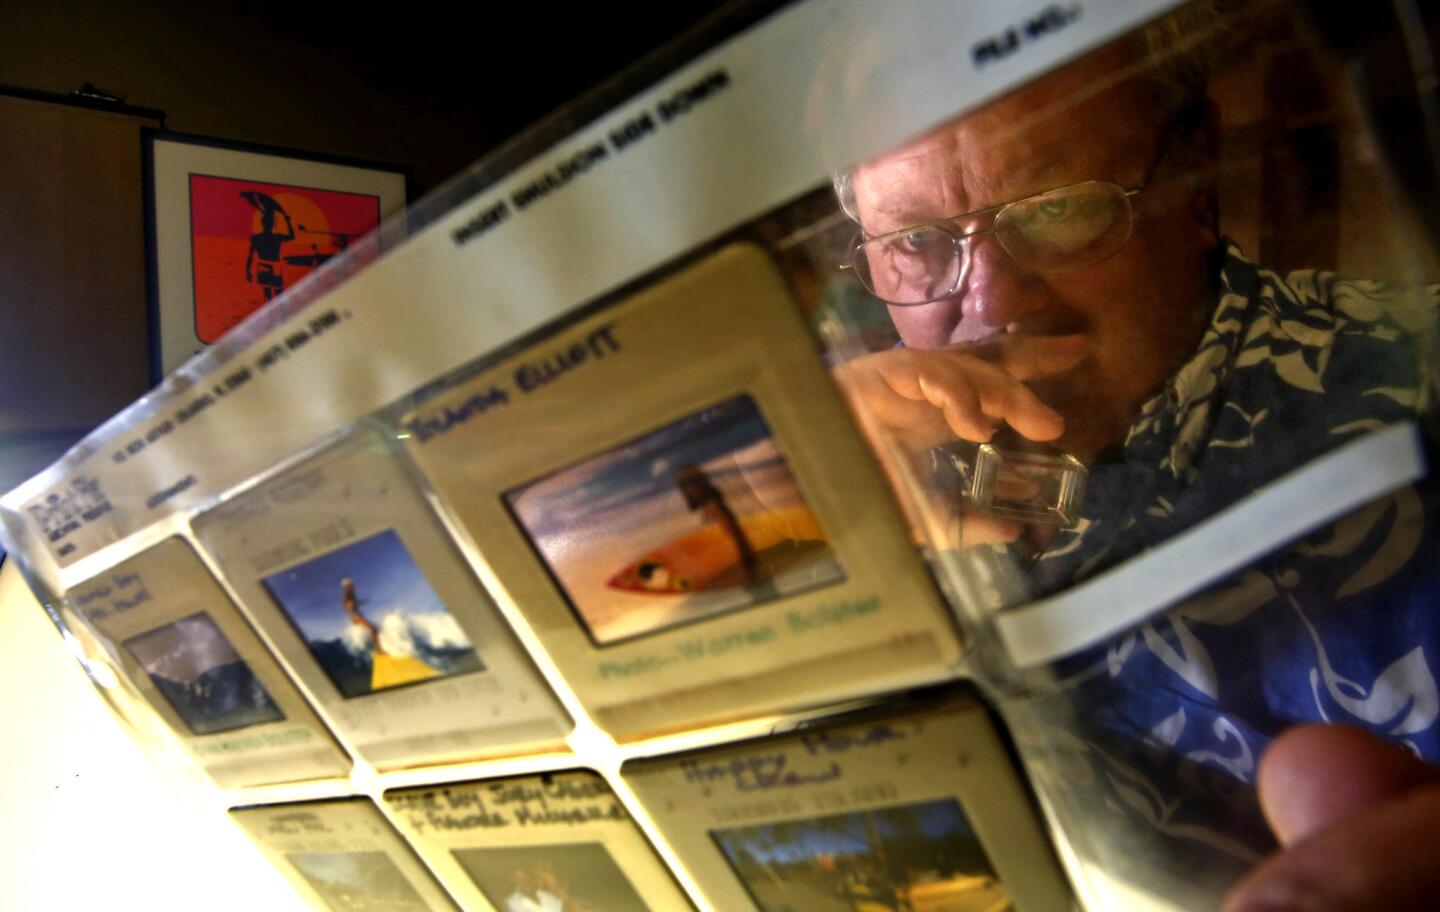 Steve Wilkings looks through Kodachrome slides by the late surf photographer Warren Bolster. Some of the 140 collections held by the center are encyclopedic -- thousands of photos of surfers hanging ten on longboards, dropping into steep pitches or shooting through curls.